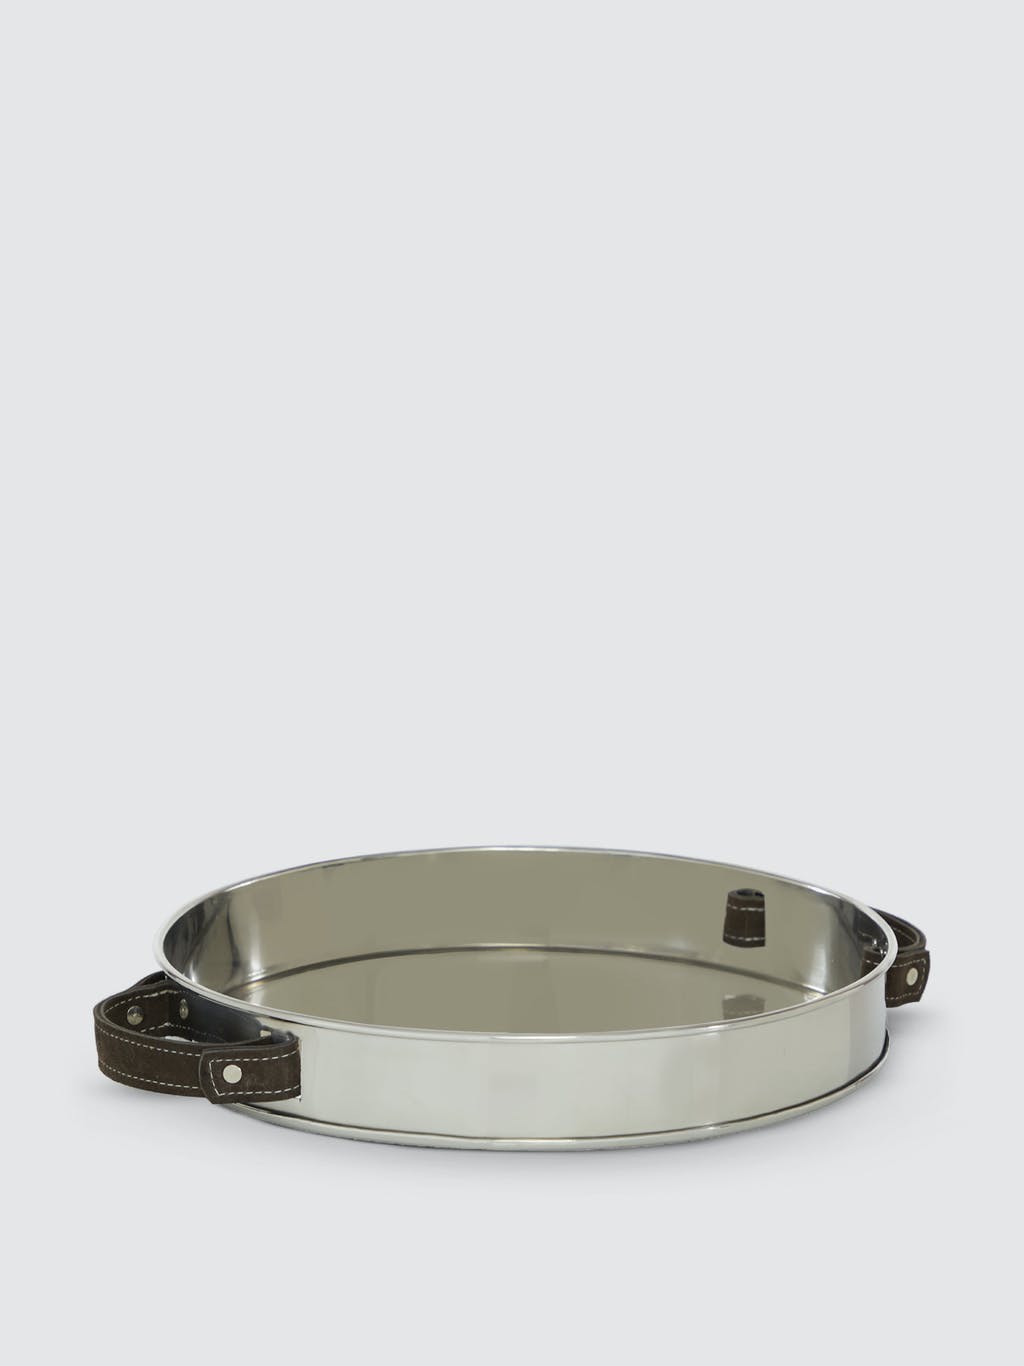 Round Serving Tray with Leather Handles